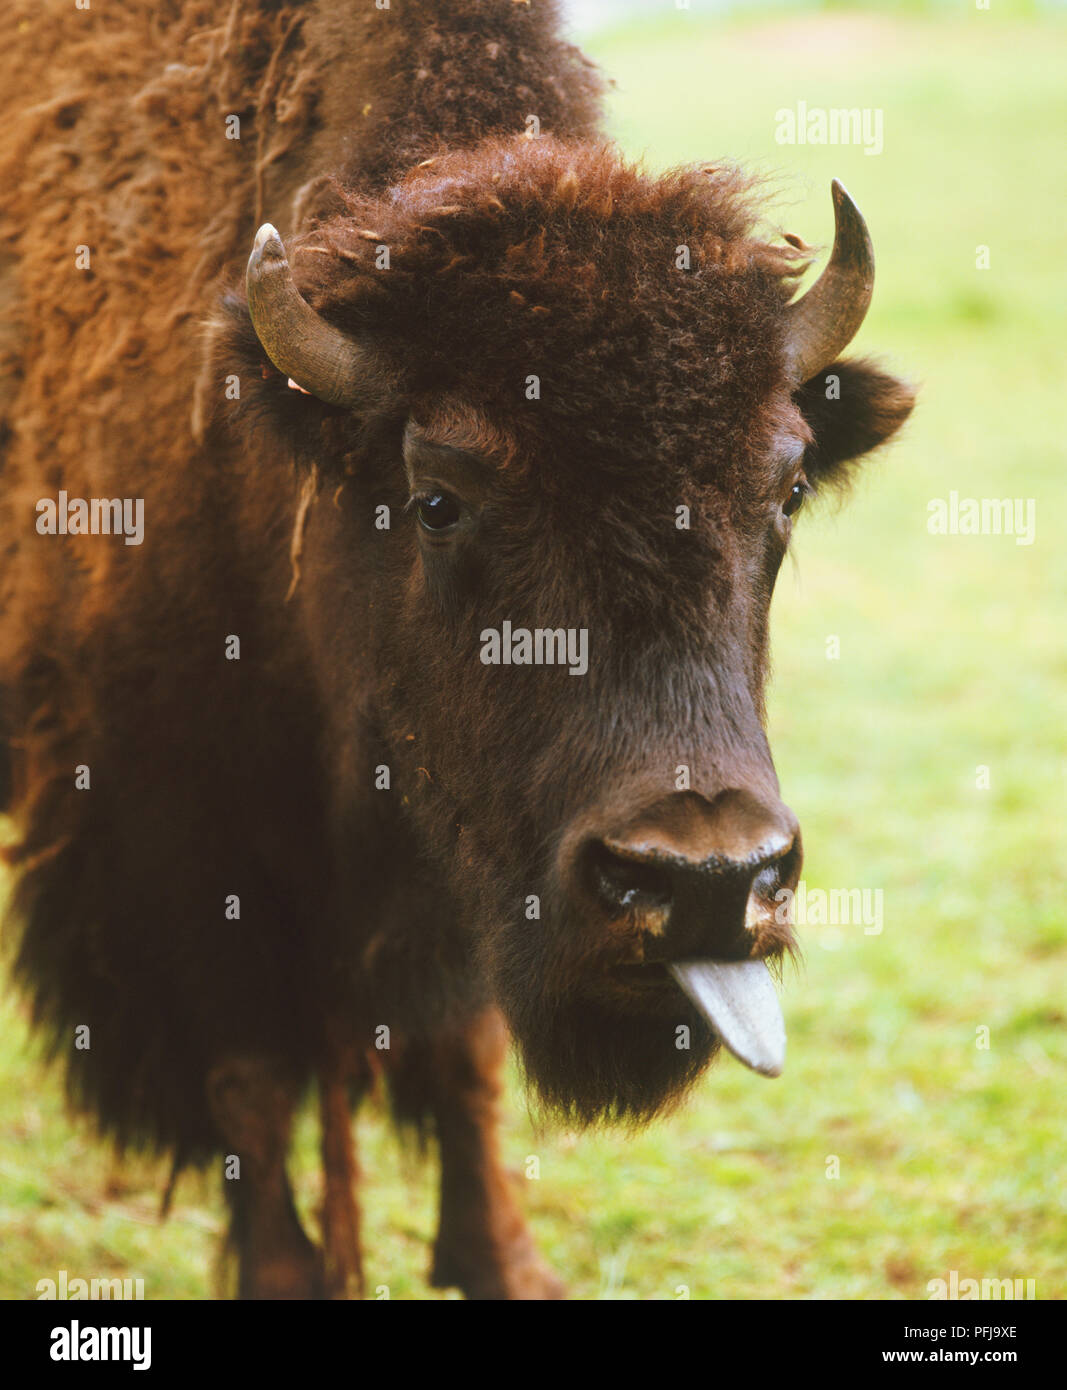 Horned brown Bull (Bos taurus) sticking its tongue out Stock Photo